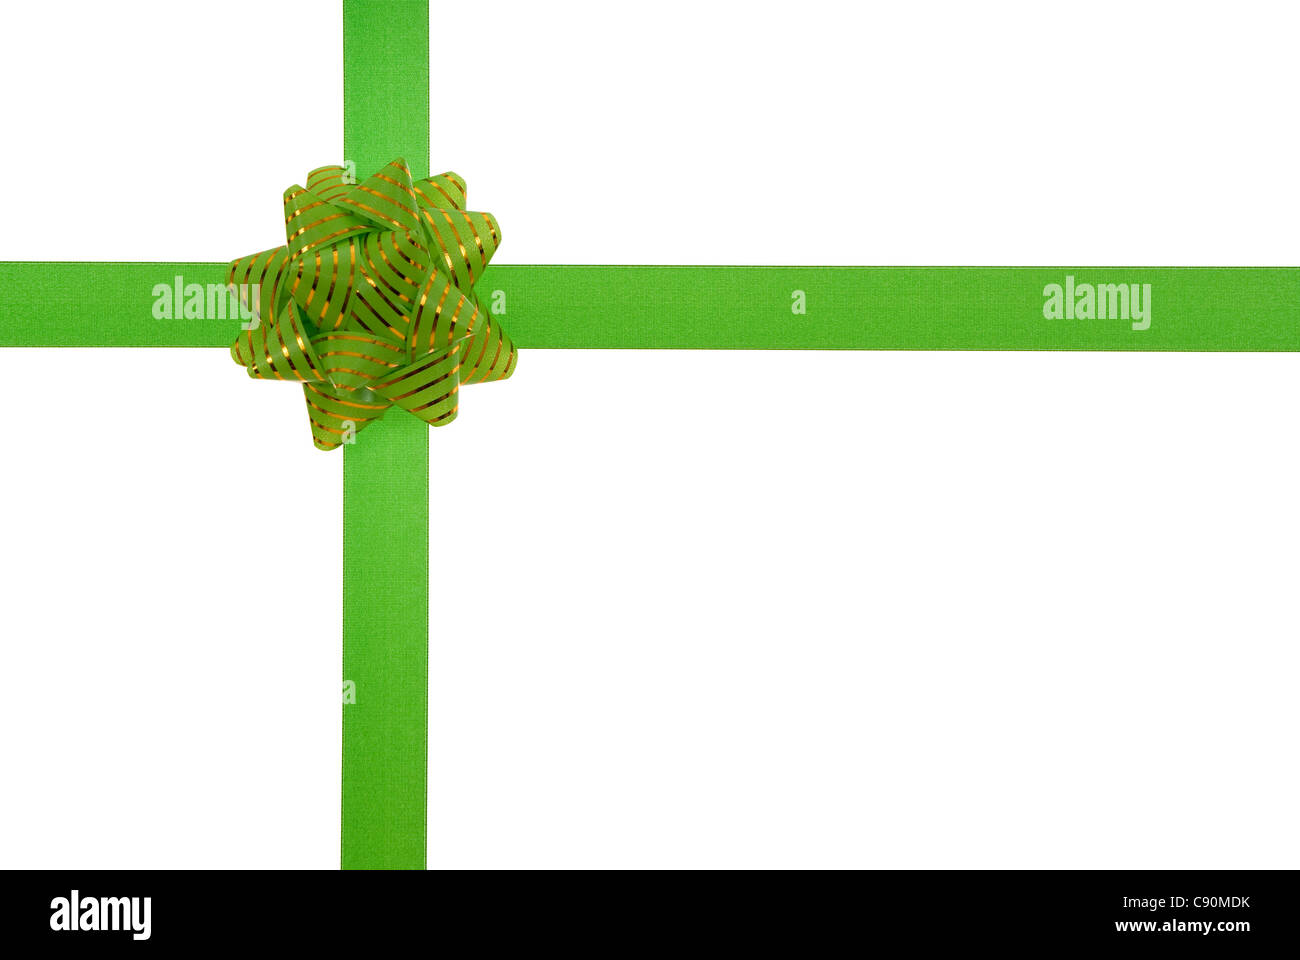 green ribbon with green bow on gift Stock Photo